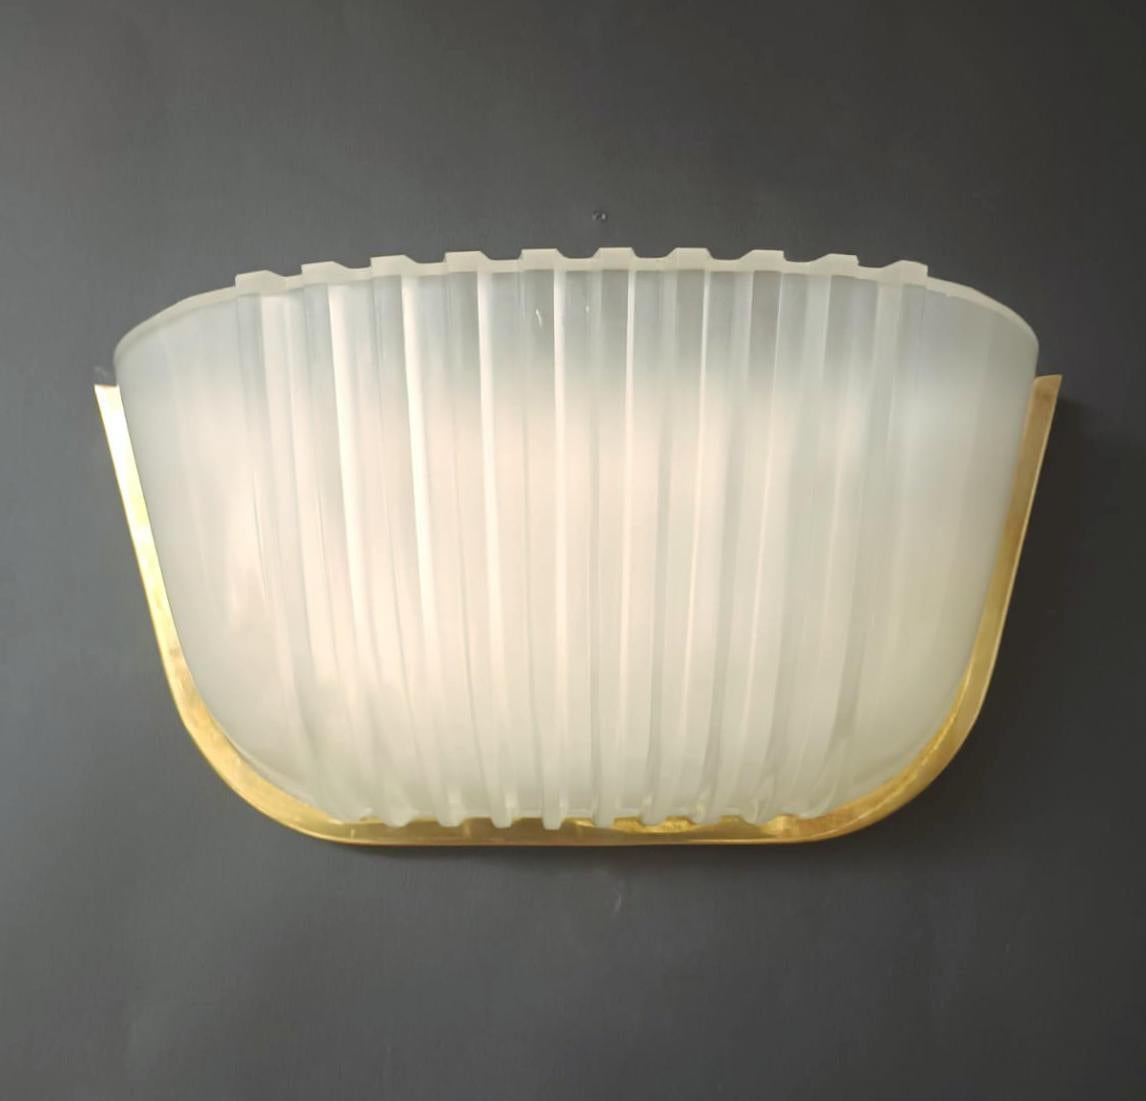 Vintage French wall light with Art Deco ribbed frosted glass / made in France circa 1930s
2 lights / E12 or E14 type / max 40W each
Measures: Height 6 inches / Width 13 inches / Depth 5 inches
1 pair in stock in Italy.
  